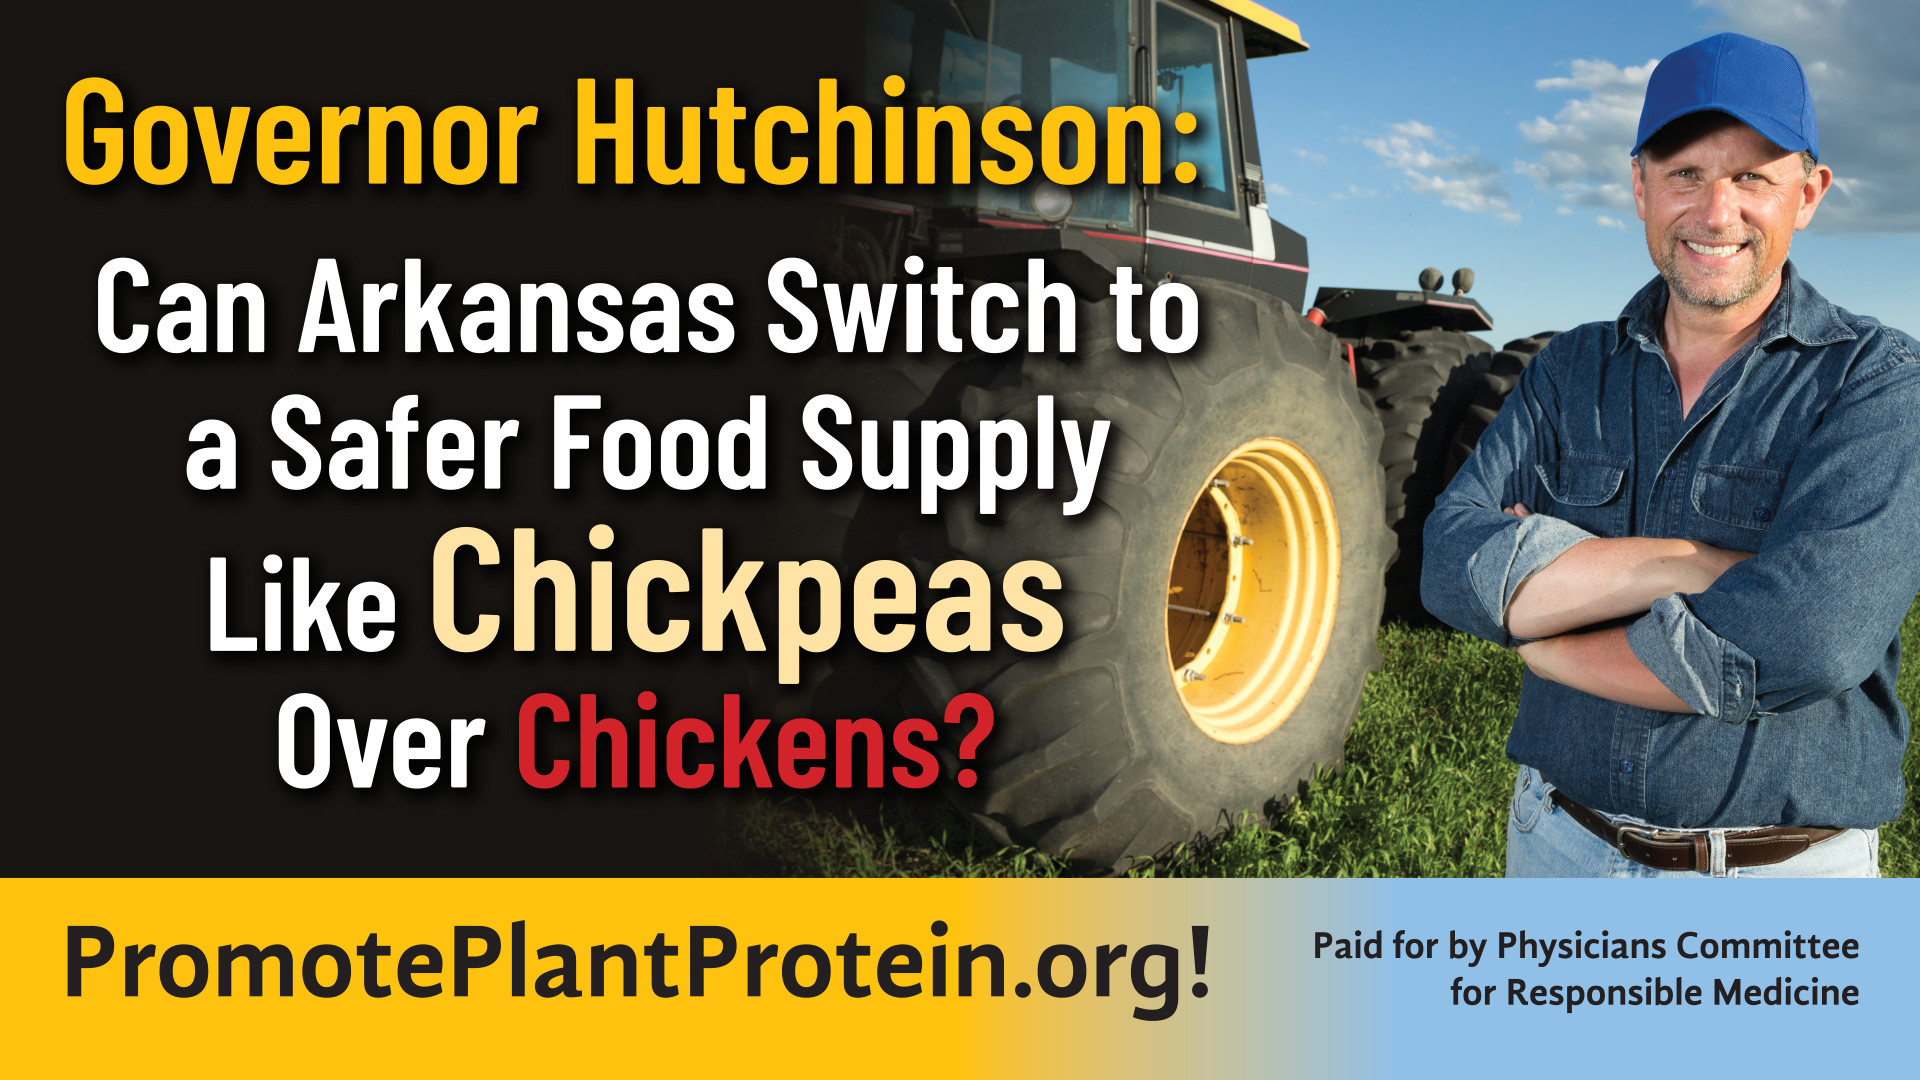 Doctors Urge Arkansas Governor to Promote Plant Protein and Repurpose Slaughterhouses